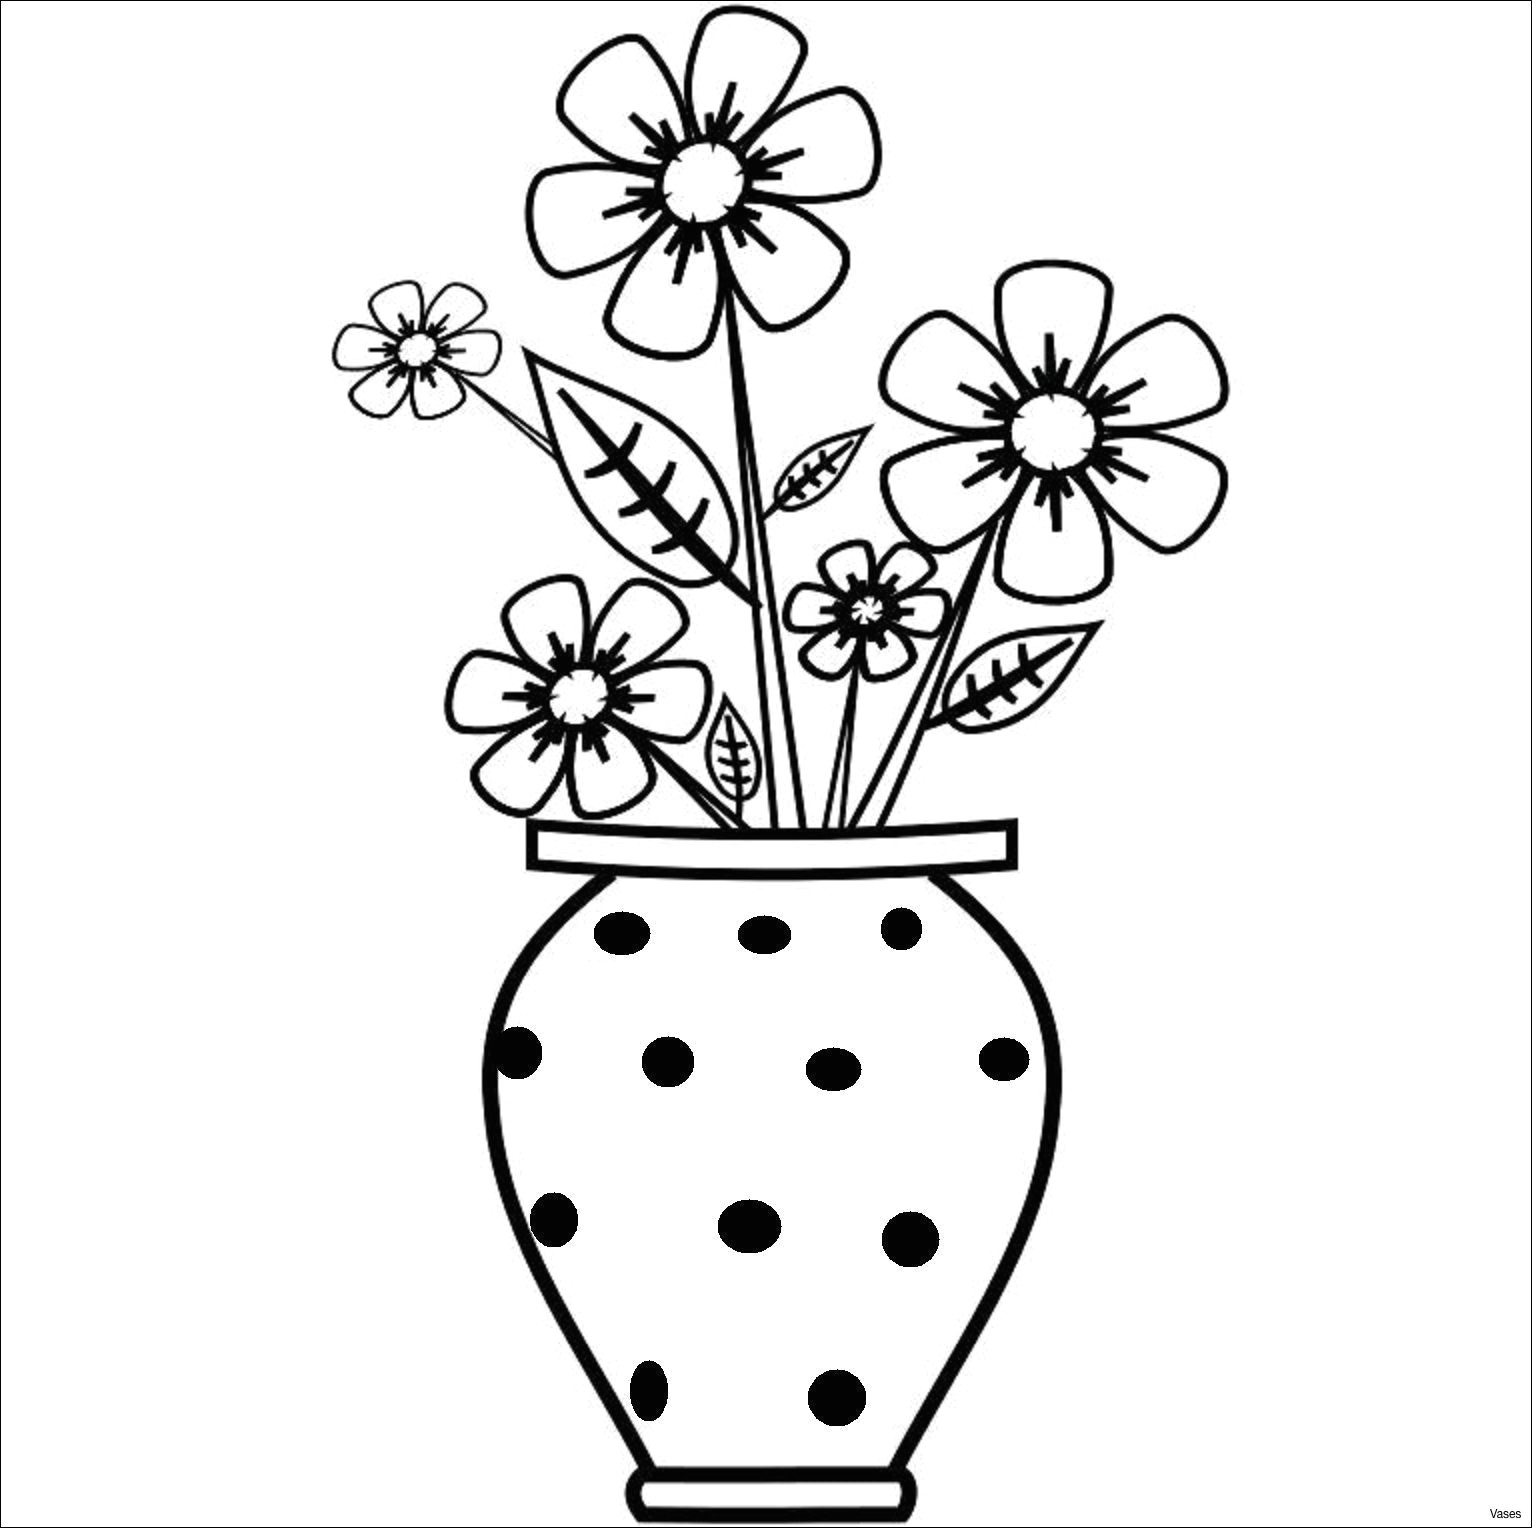 Drawings Of Roses Step by Step Images Of Easy Drawings Vase Art Drawings How to Draw A Vase Step 2h